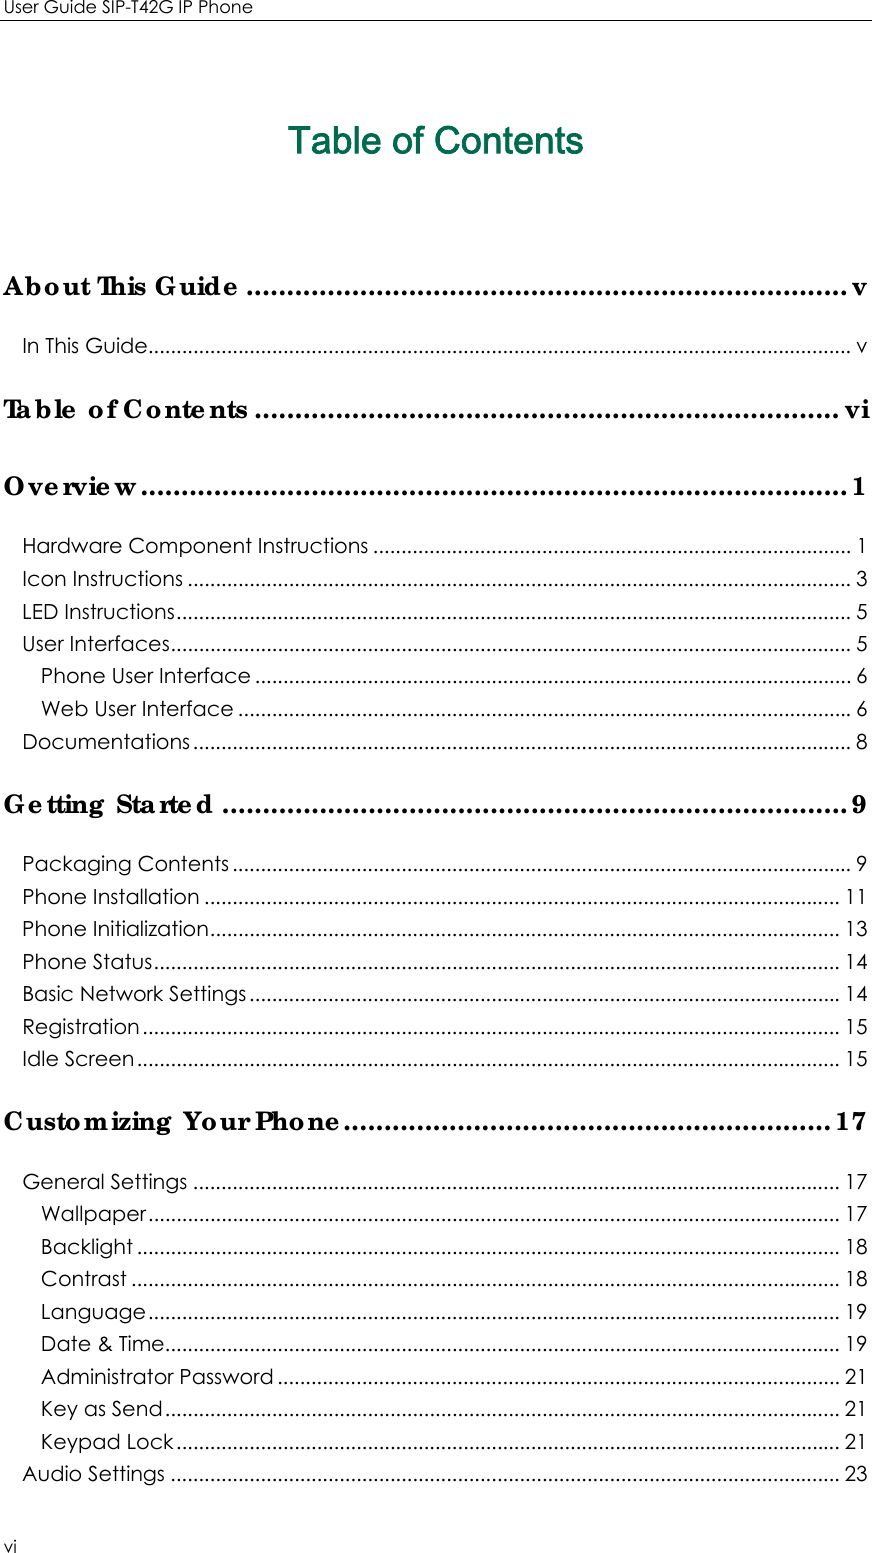 User Guide SIP-T42G IP Phone vi Table of Contents About This Guide .......................................................................... vIn This Guide............................................................................................................................. vTable of Contents ........................................................................ viOverview ....................................................................................... 1Hardware Component Instructions ..................................................................................... 1Icon Instructions ...................................................................................................................... 3LED Instructions ........................................................................................................................ 5User Interfaces ......................................................................................................................... 5Phone User Interface .......................................................................................................... 6Web User Interface ............................................................................................................. 6Documentations ..................................................................................................................... 8Getting Started ............................................................................. 9Packaging Contents .............................................................................................................. 9Phone Installation ................................................................................................................. 11Phone Initialization ................................................................................................................ 13Phone Status .......................................................................................................................... 14Basic Network Settings ......................................................................................................... 14Registration ............................................................................................................................ 15Idle Screen ............................................................................................................................. 15Customizing Your Phone............................................................ 17General Settings ................................................................................................................... 17Wallpaper ........................................................................................................................... 17Backlight ............................................................................................................................. 18Contrast .............................................................................................................................. 18Language ........................................................................................................................... 19Date &amp; Time........................................................................................................................ 19Administrator Password .................................................................................................... 21Key as Send ........................................................................................................................ 21Keypad Lock ...................................................................................................................... 21Audio Settings ....................................................................................................................... 23